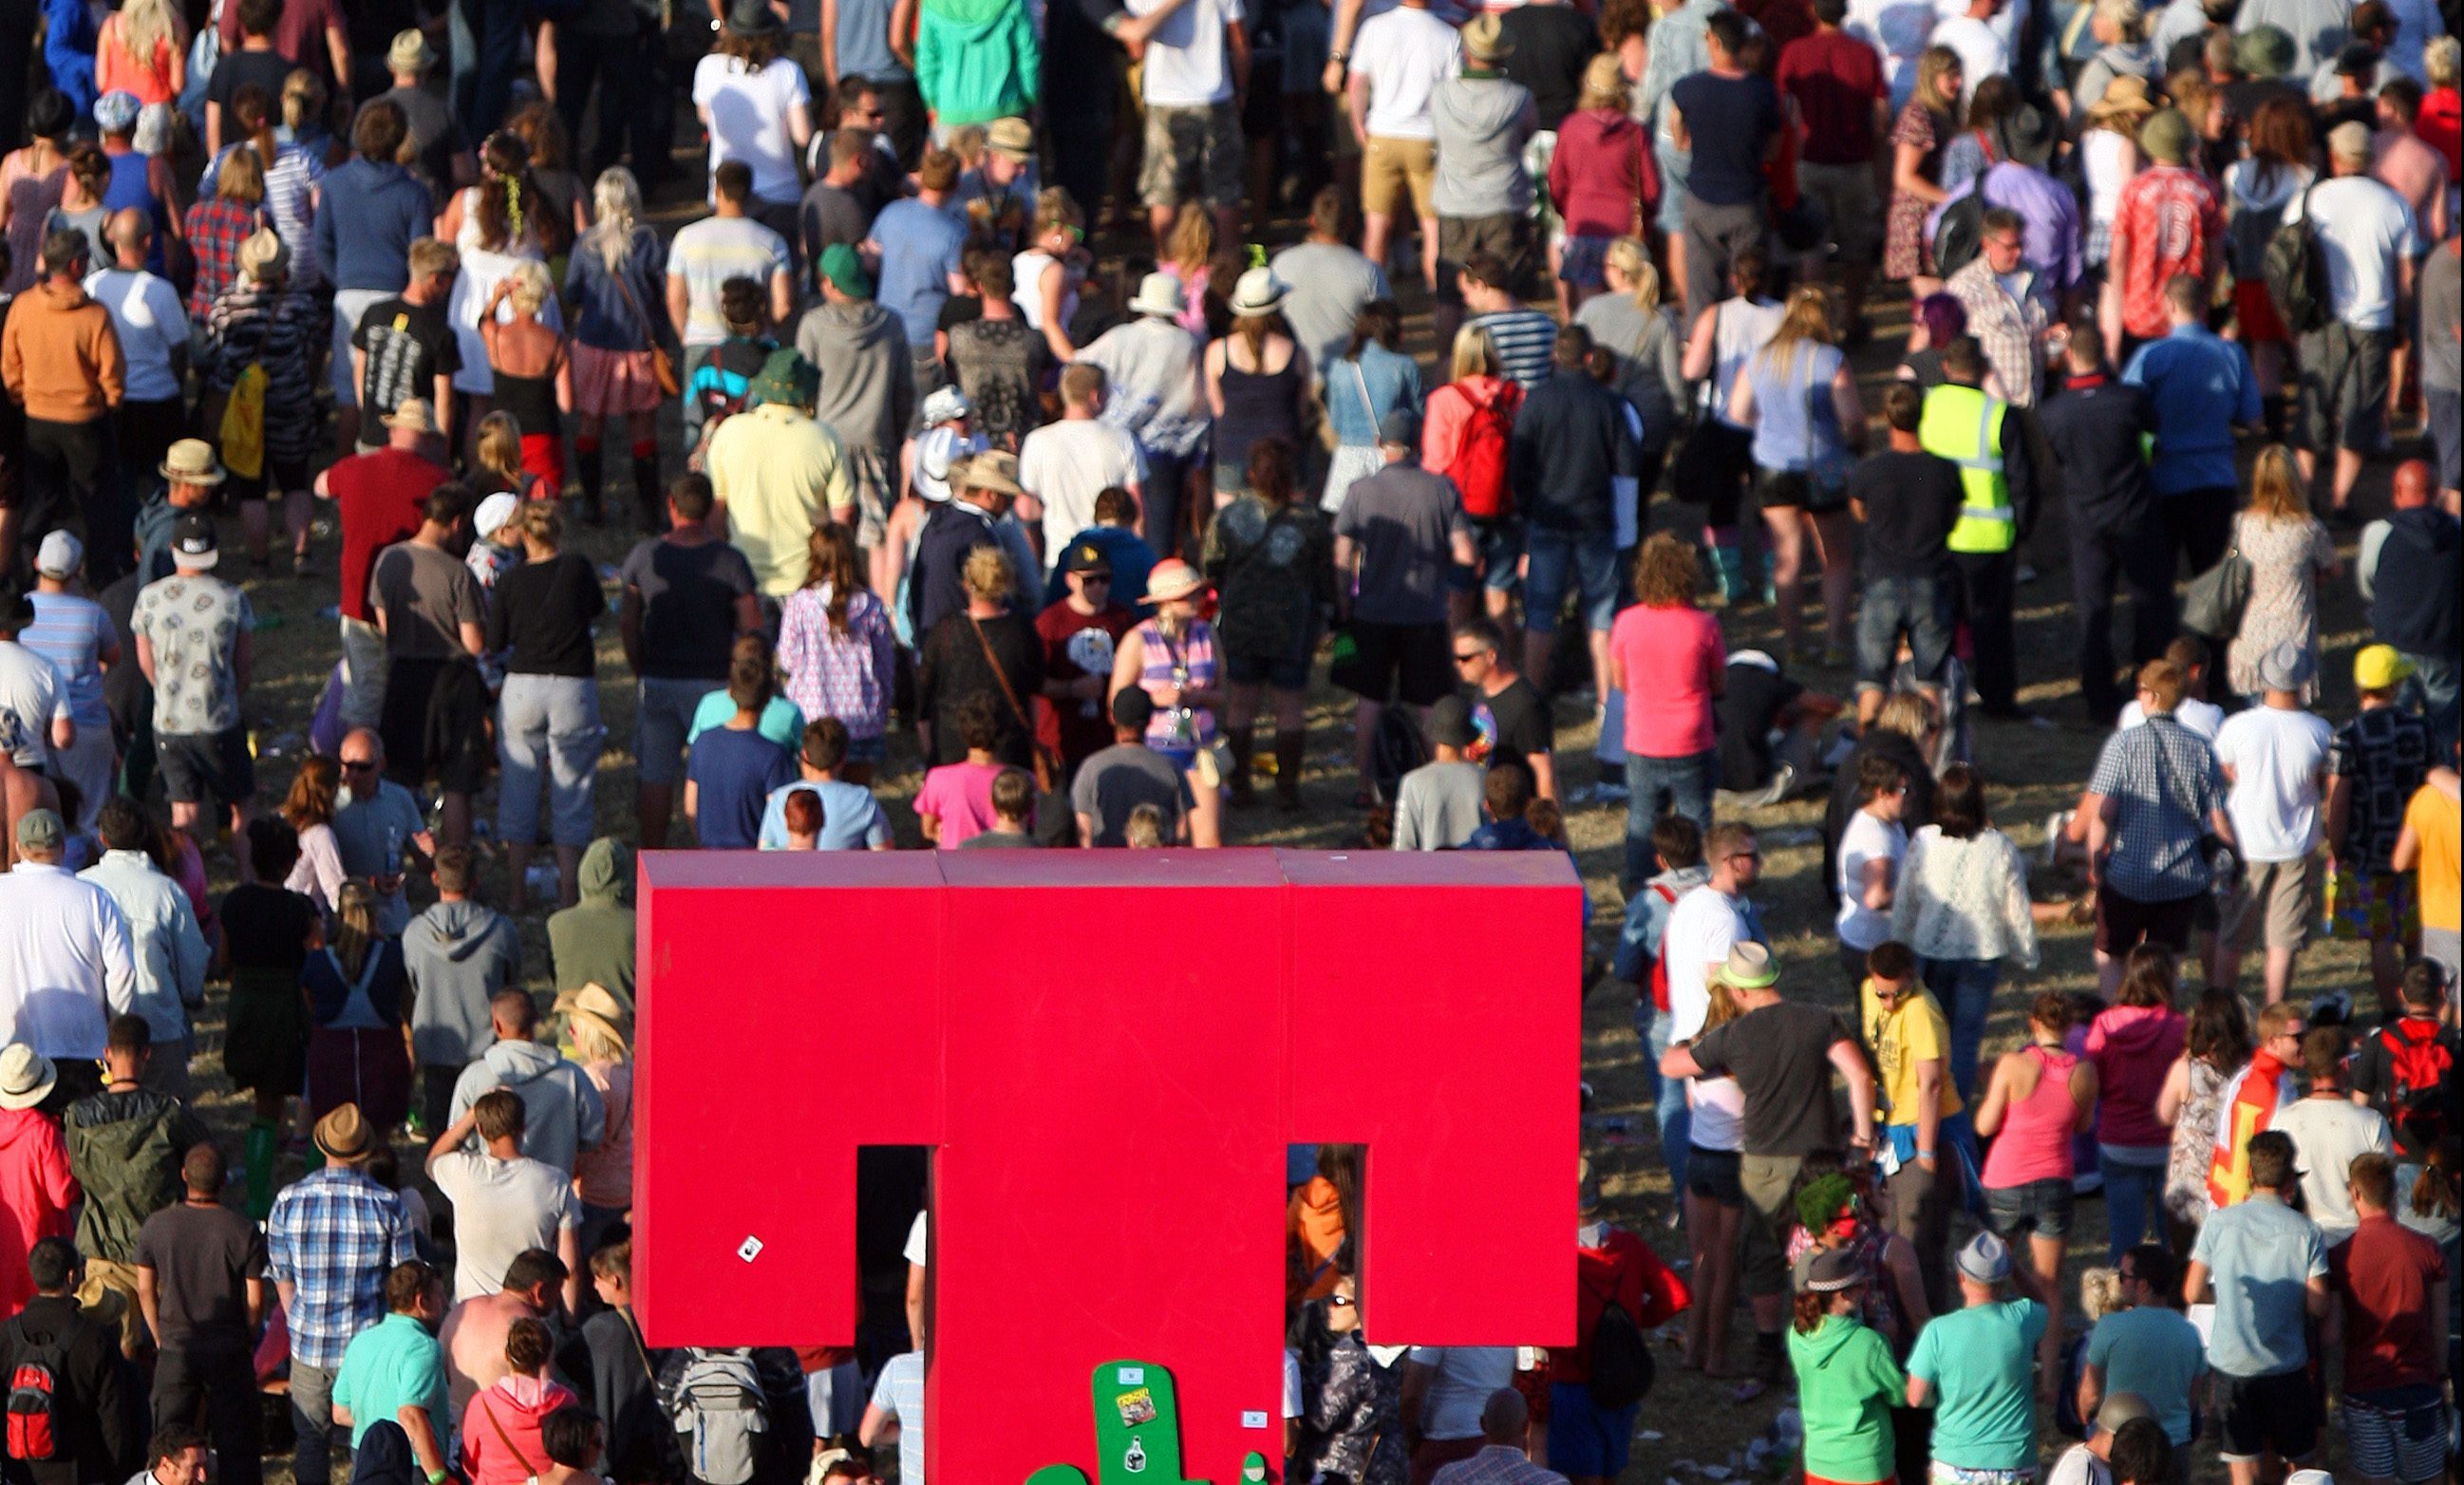 Drugs have cast a shadow over T in the Park in recent years.